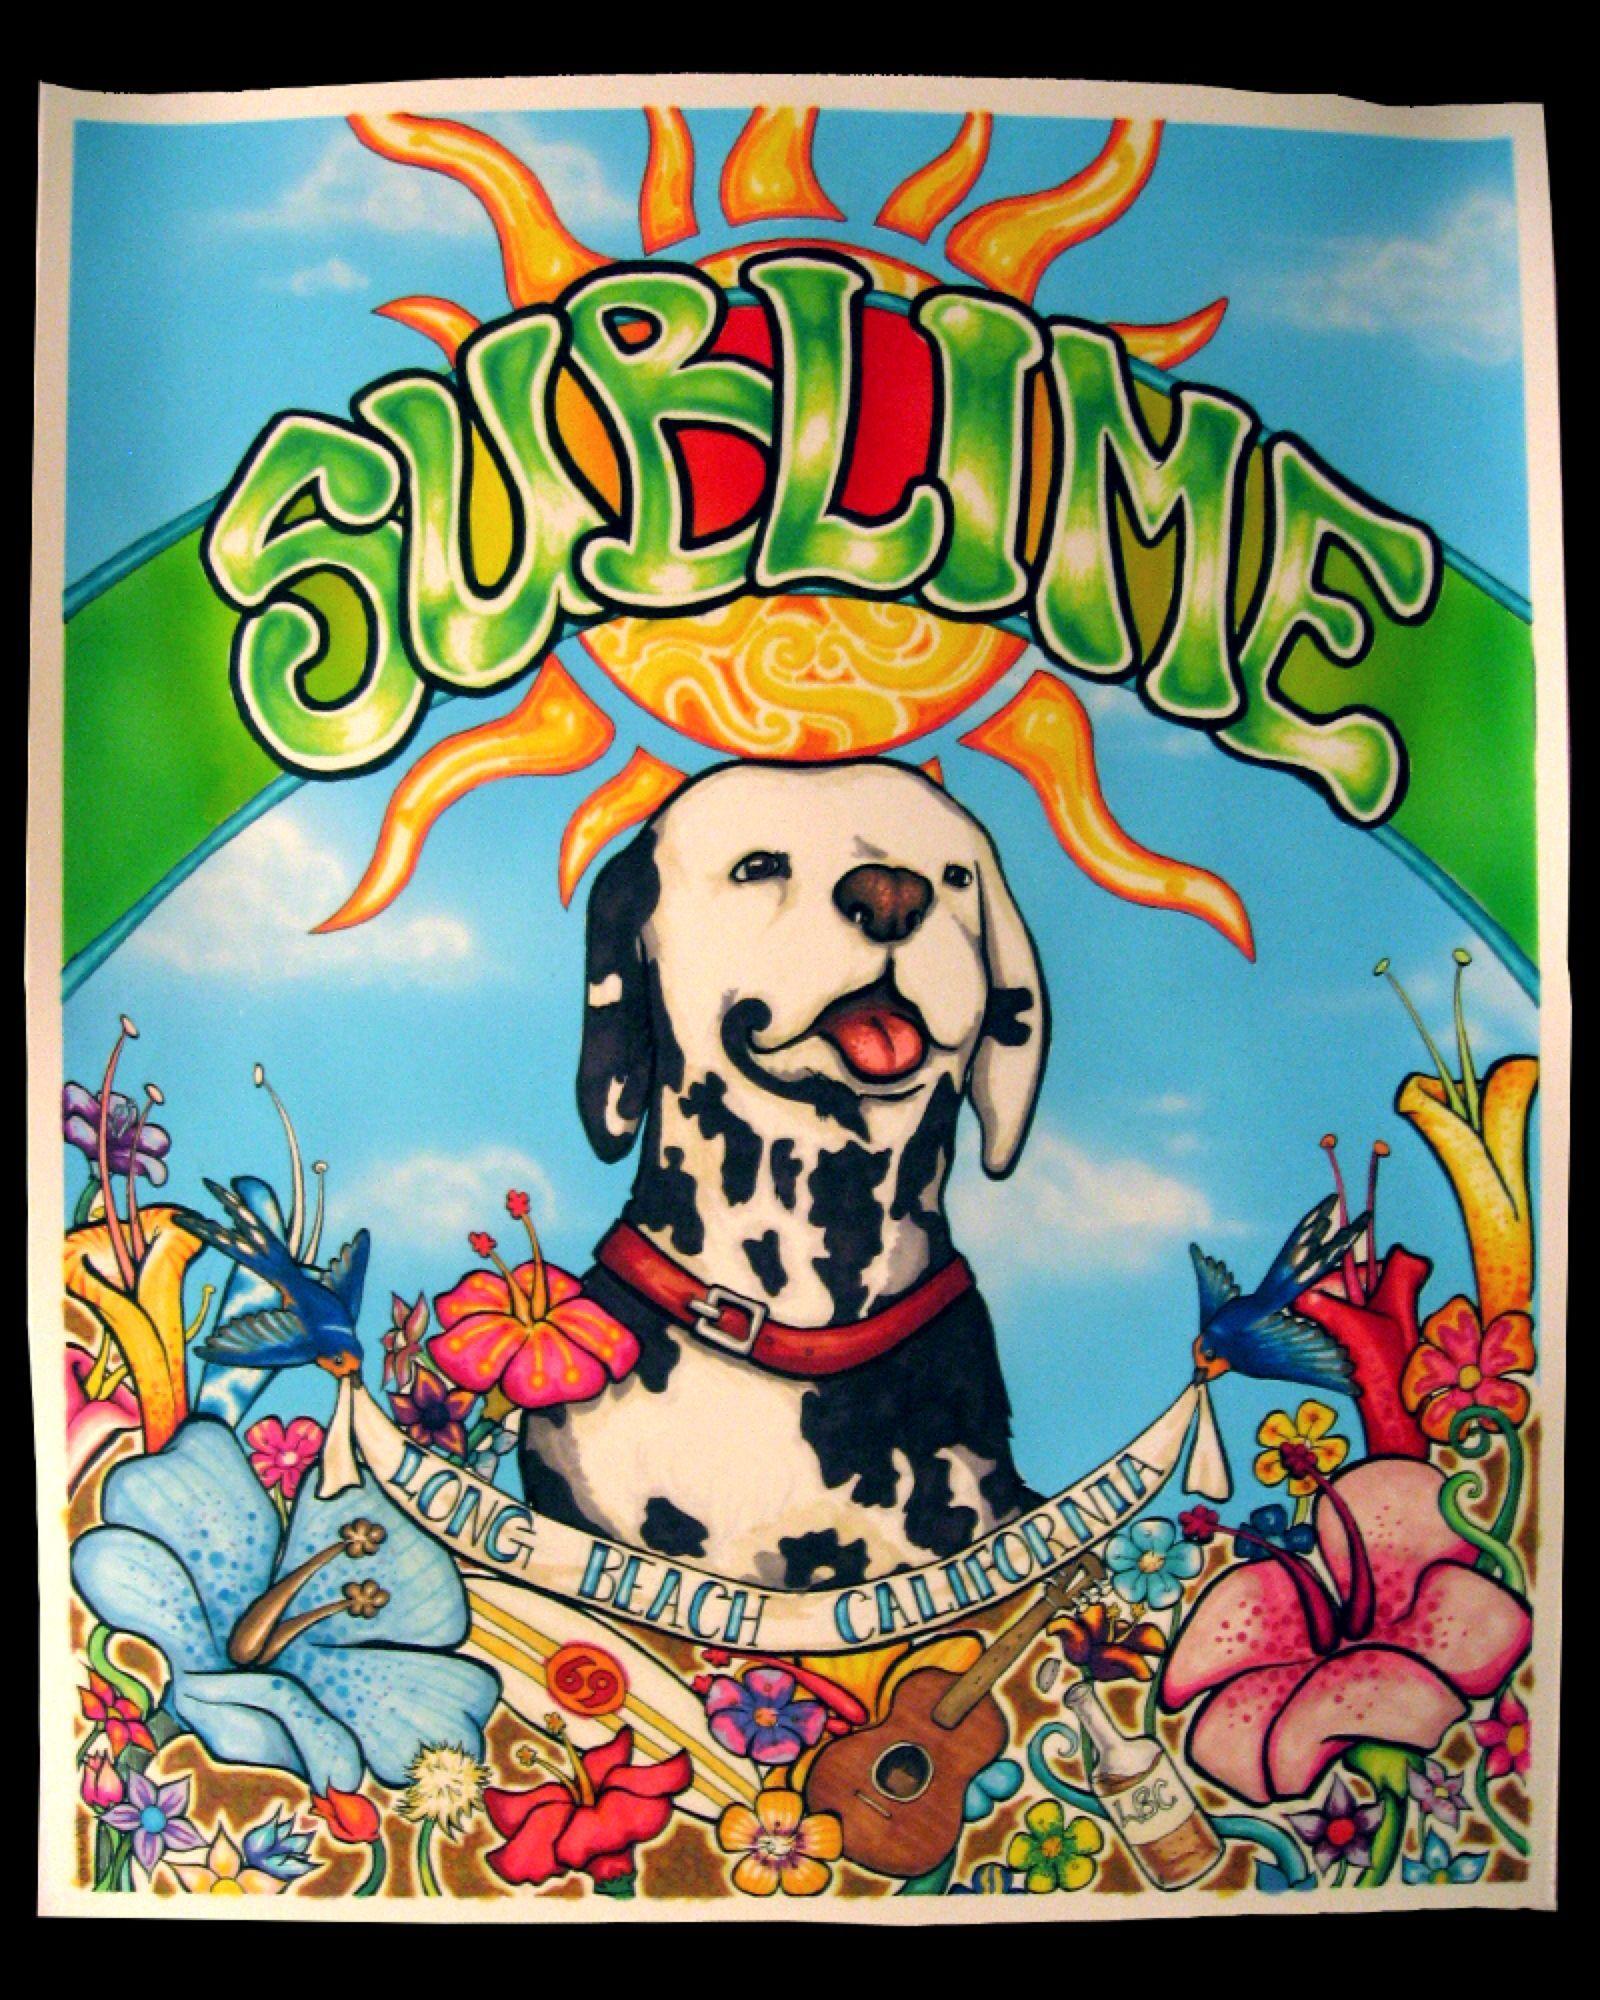 Mobile phone and lock screen  Sublime Band HD phone wallpaper  Pxfuel